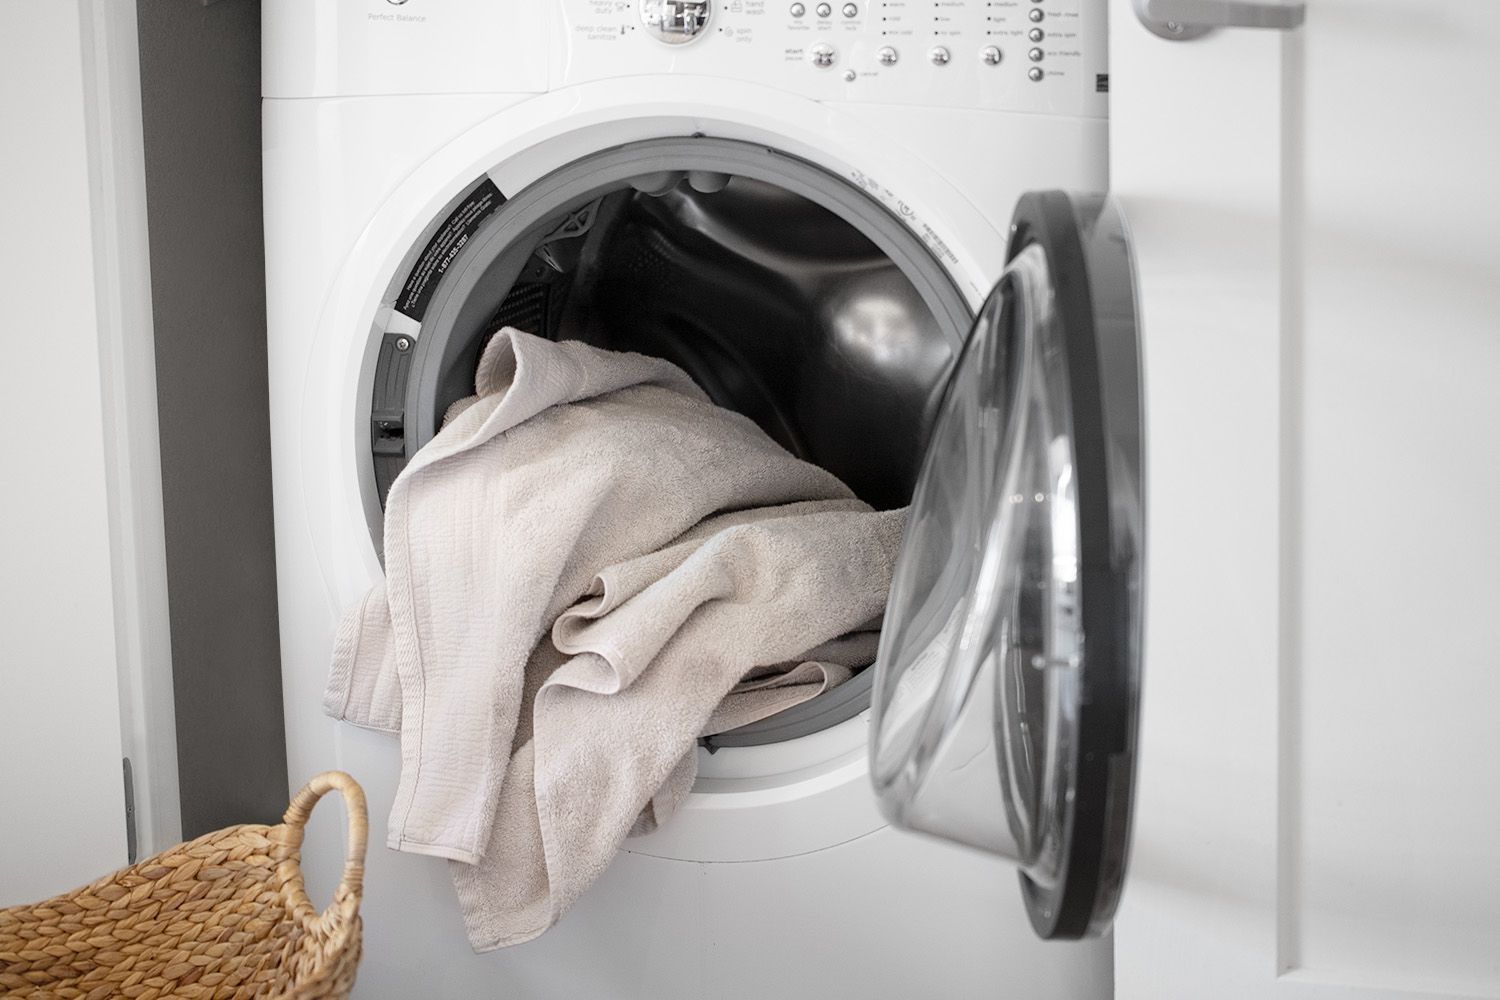 6 Things You Should Never Do to Your Washing Machine